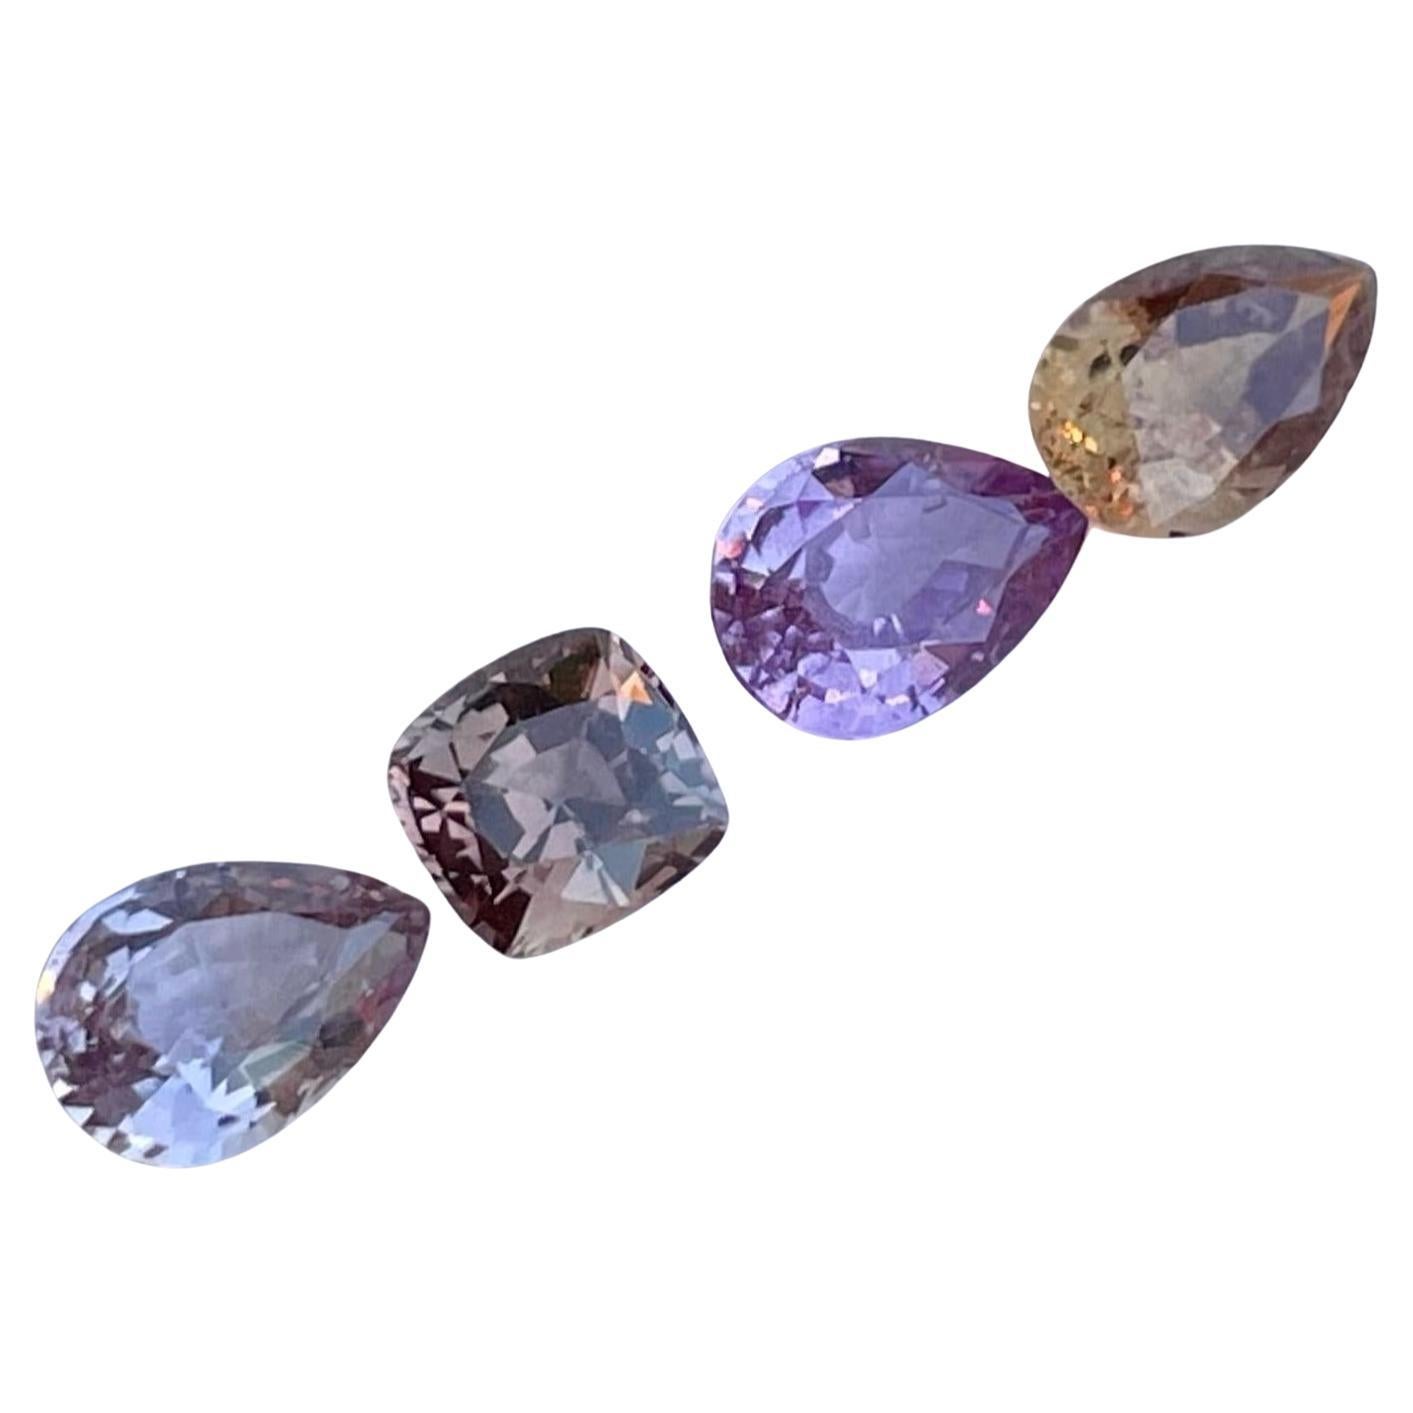 3.48 carats Multi-Color Stones Lot Natural Loose Sapphire Gemstones From Africa For Sale